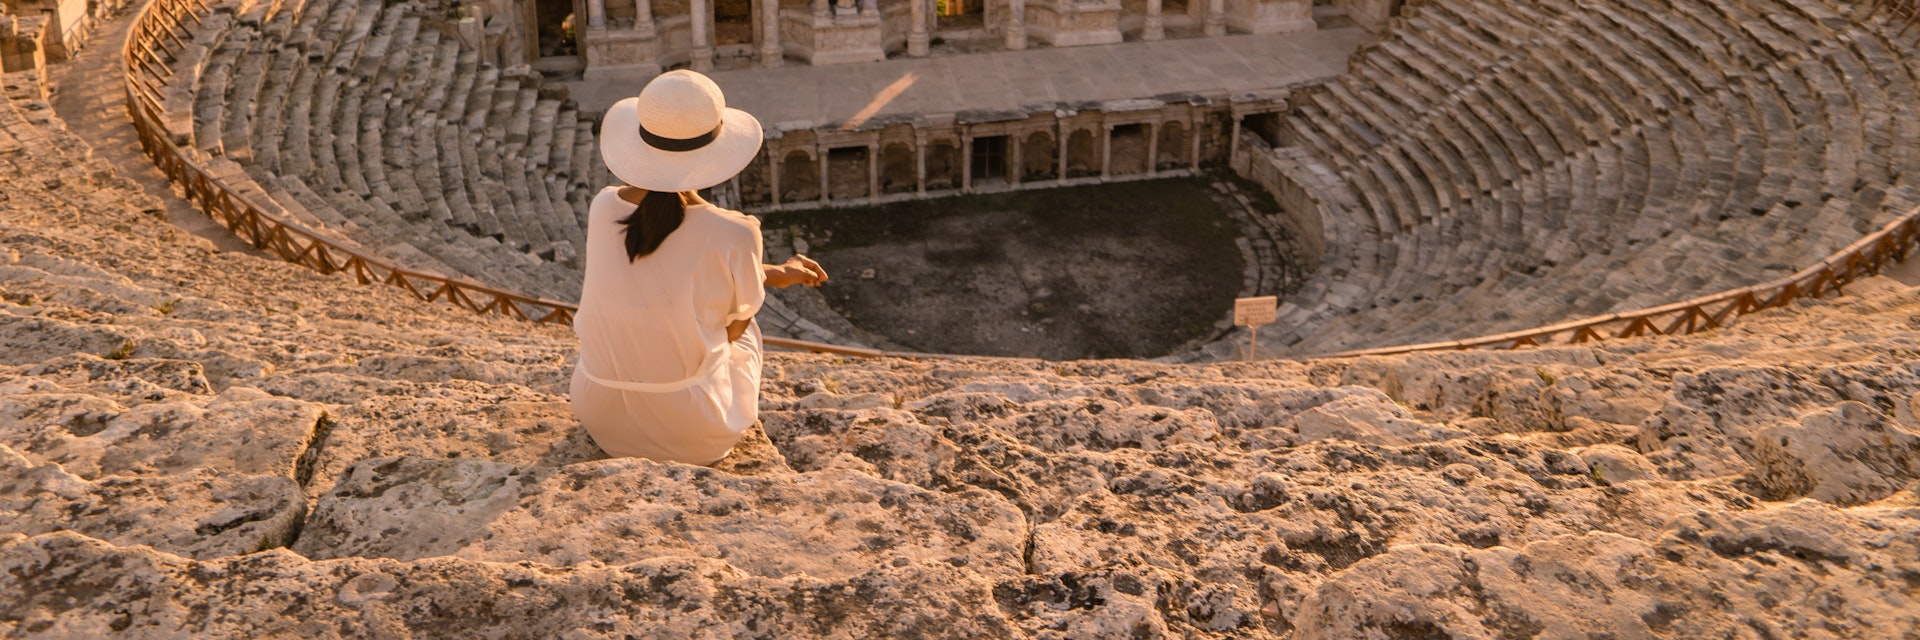 Hierapolis ancient city Pamukkale Turkey, young woman with hat watching sunset by the ruins Unesco ; Shutterstock ID 1167278944; your: Bridget Brown; gl: 65050; netsuite: Online Editorial; full: POI Image Update